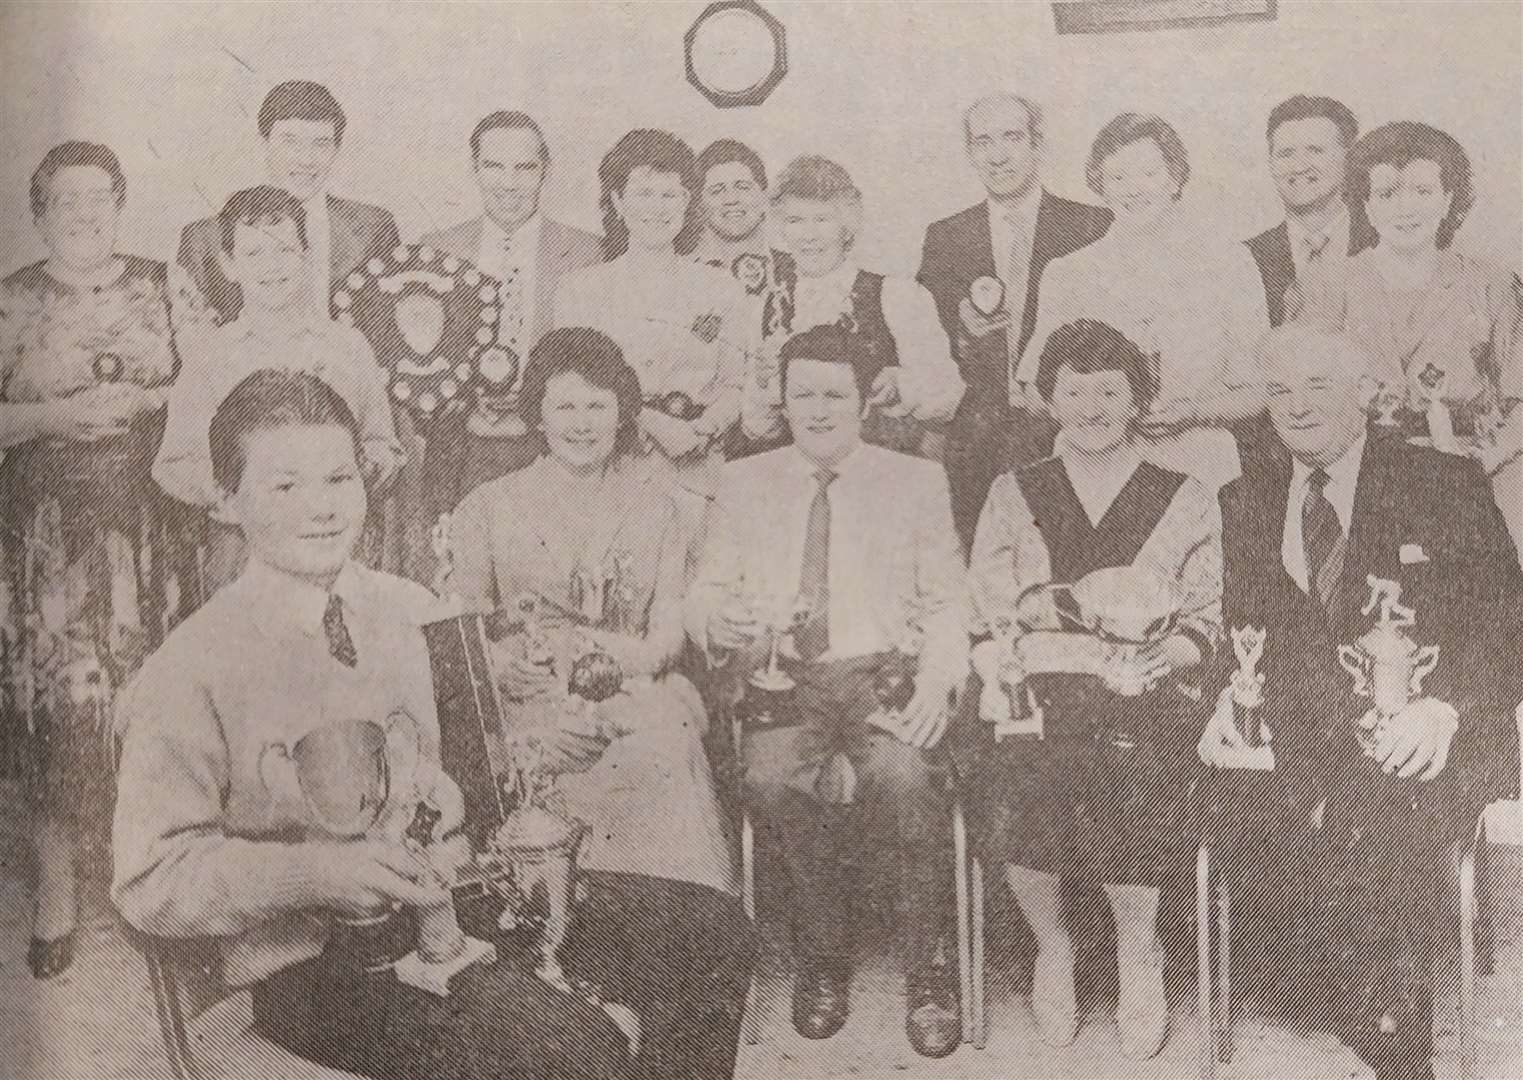 14 year old Euan Lawrence was the top bowler at Alvah Bowling Club. (Turriff Advertiser 1988)